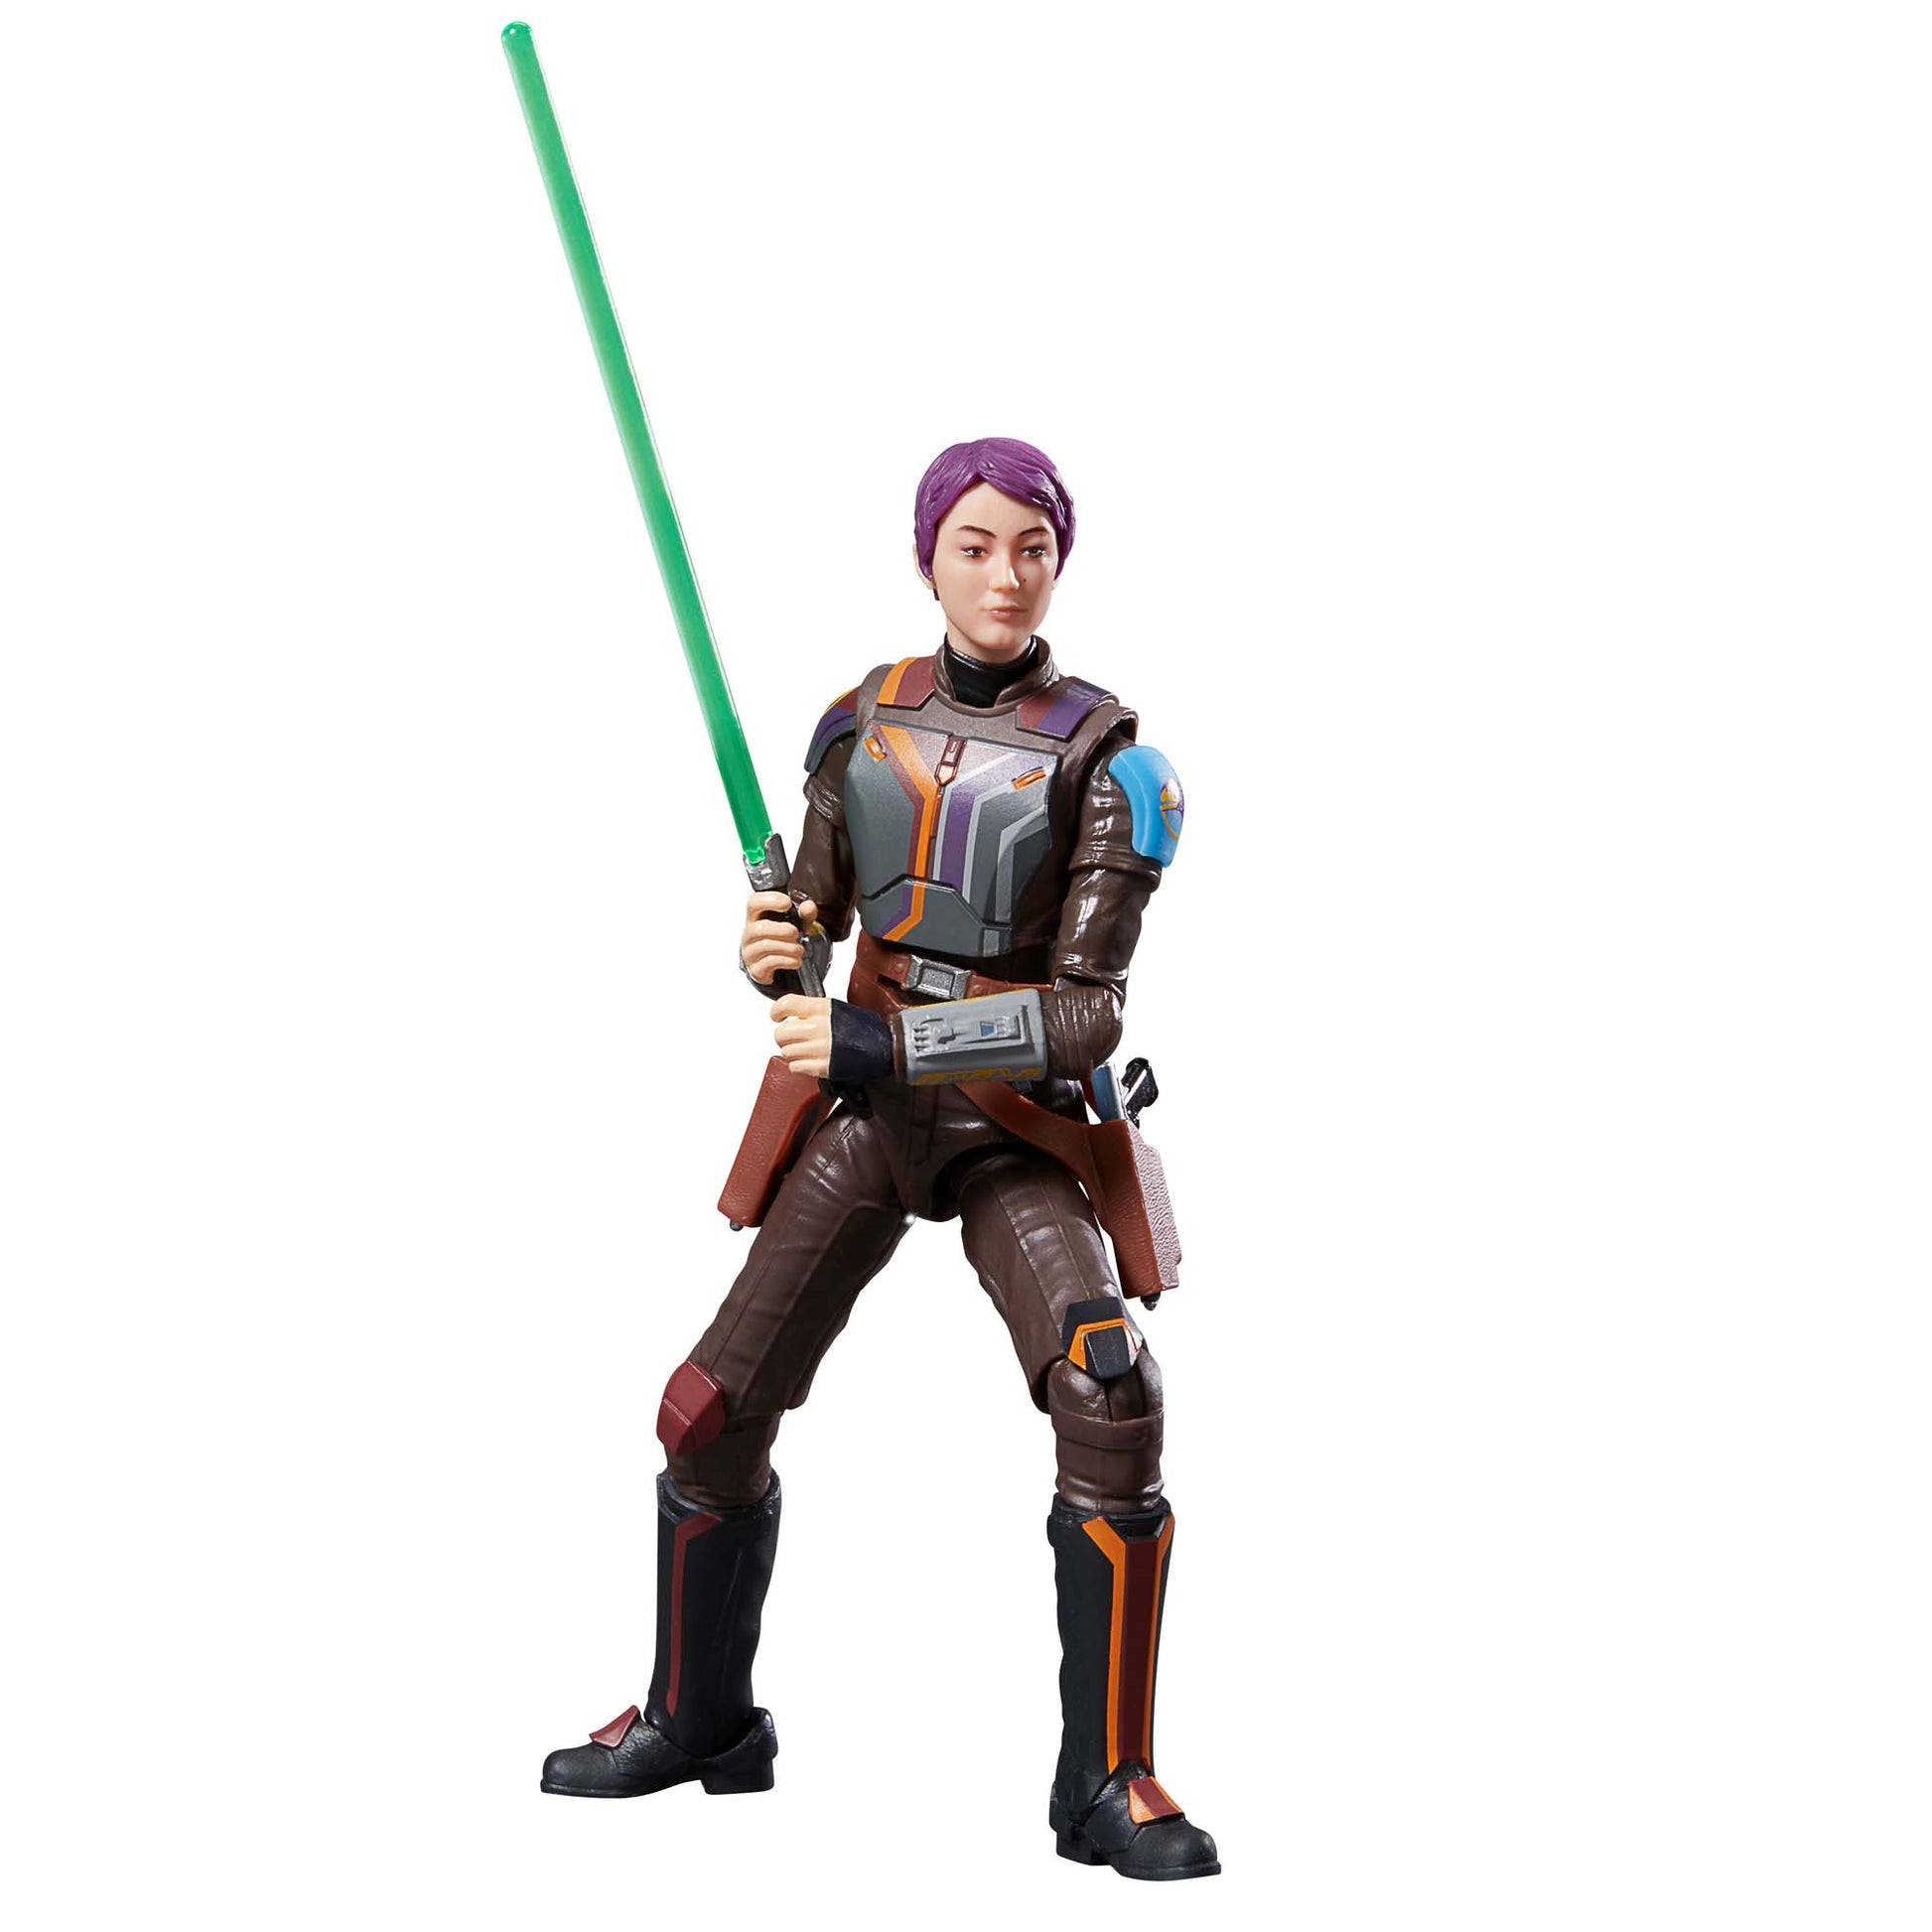 Star Wars The Black Series Sabine Wren 6-Inch Action Figure Toy with light saber - Heretoserveyou